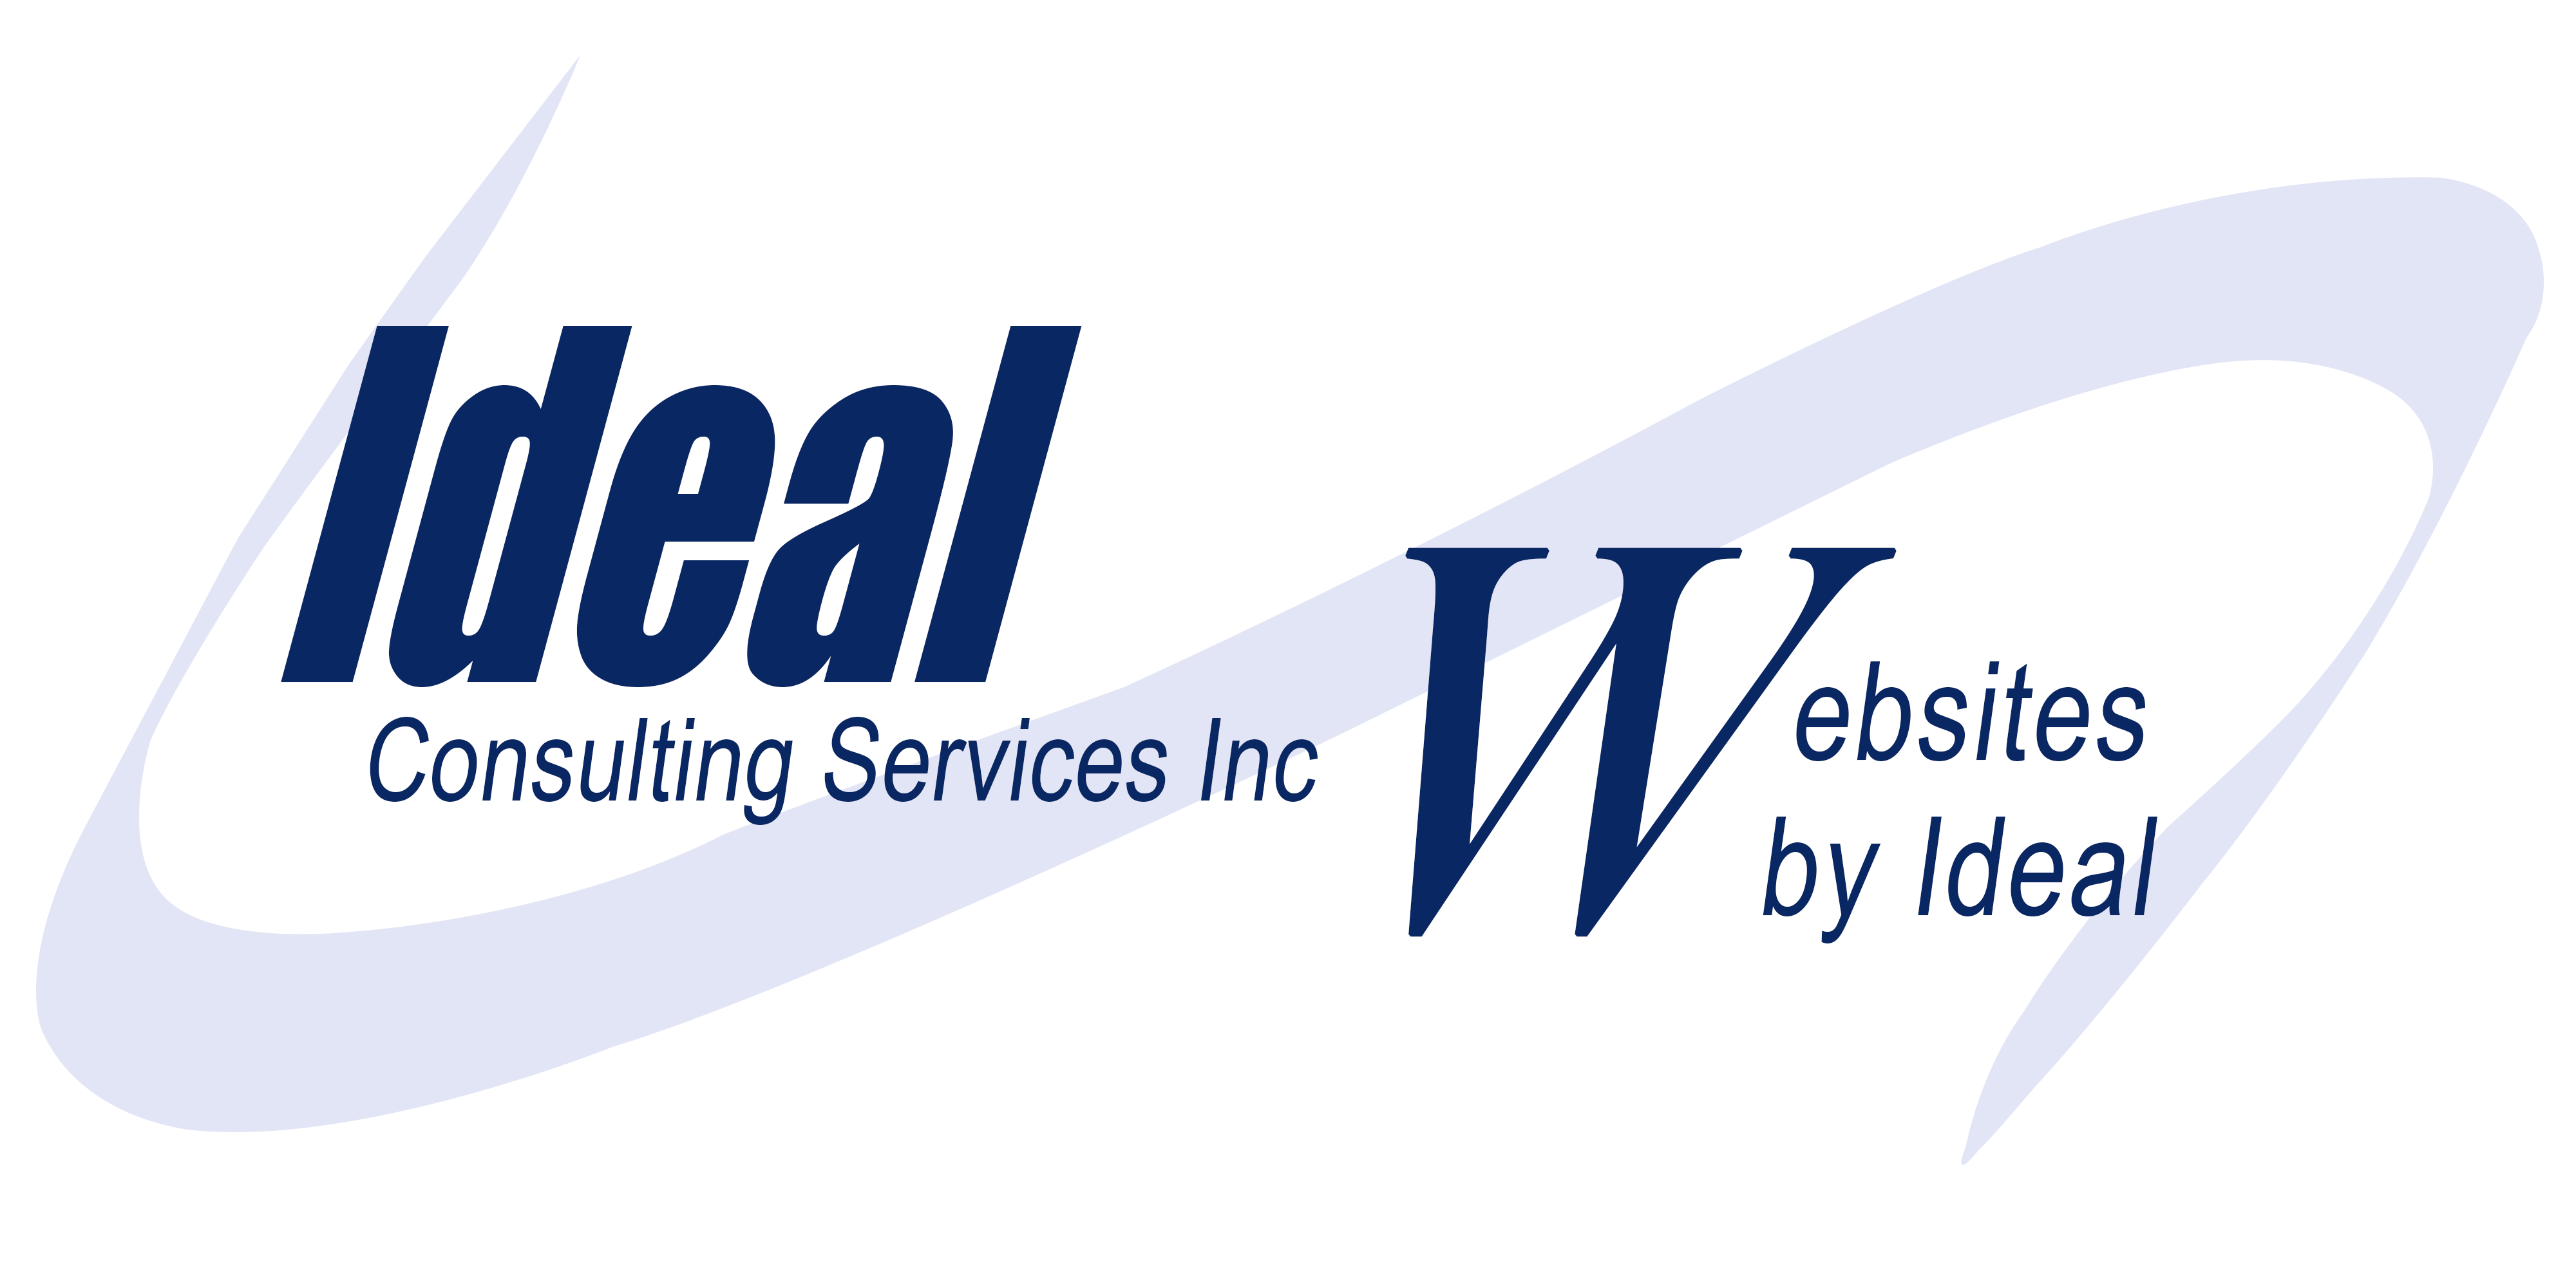 Websites by Ideal